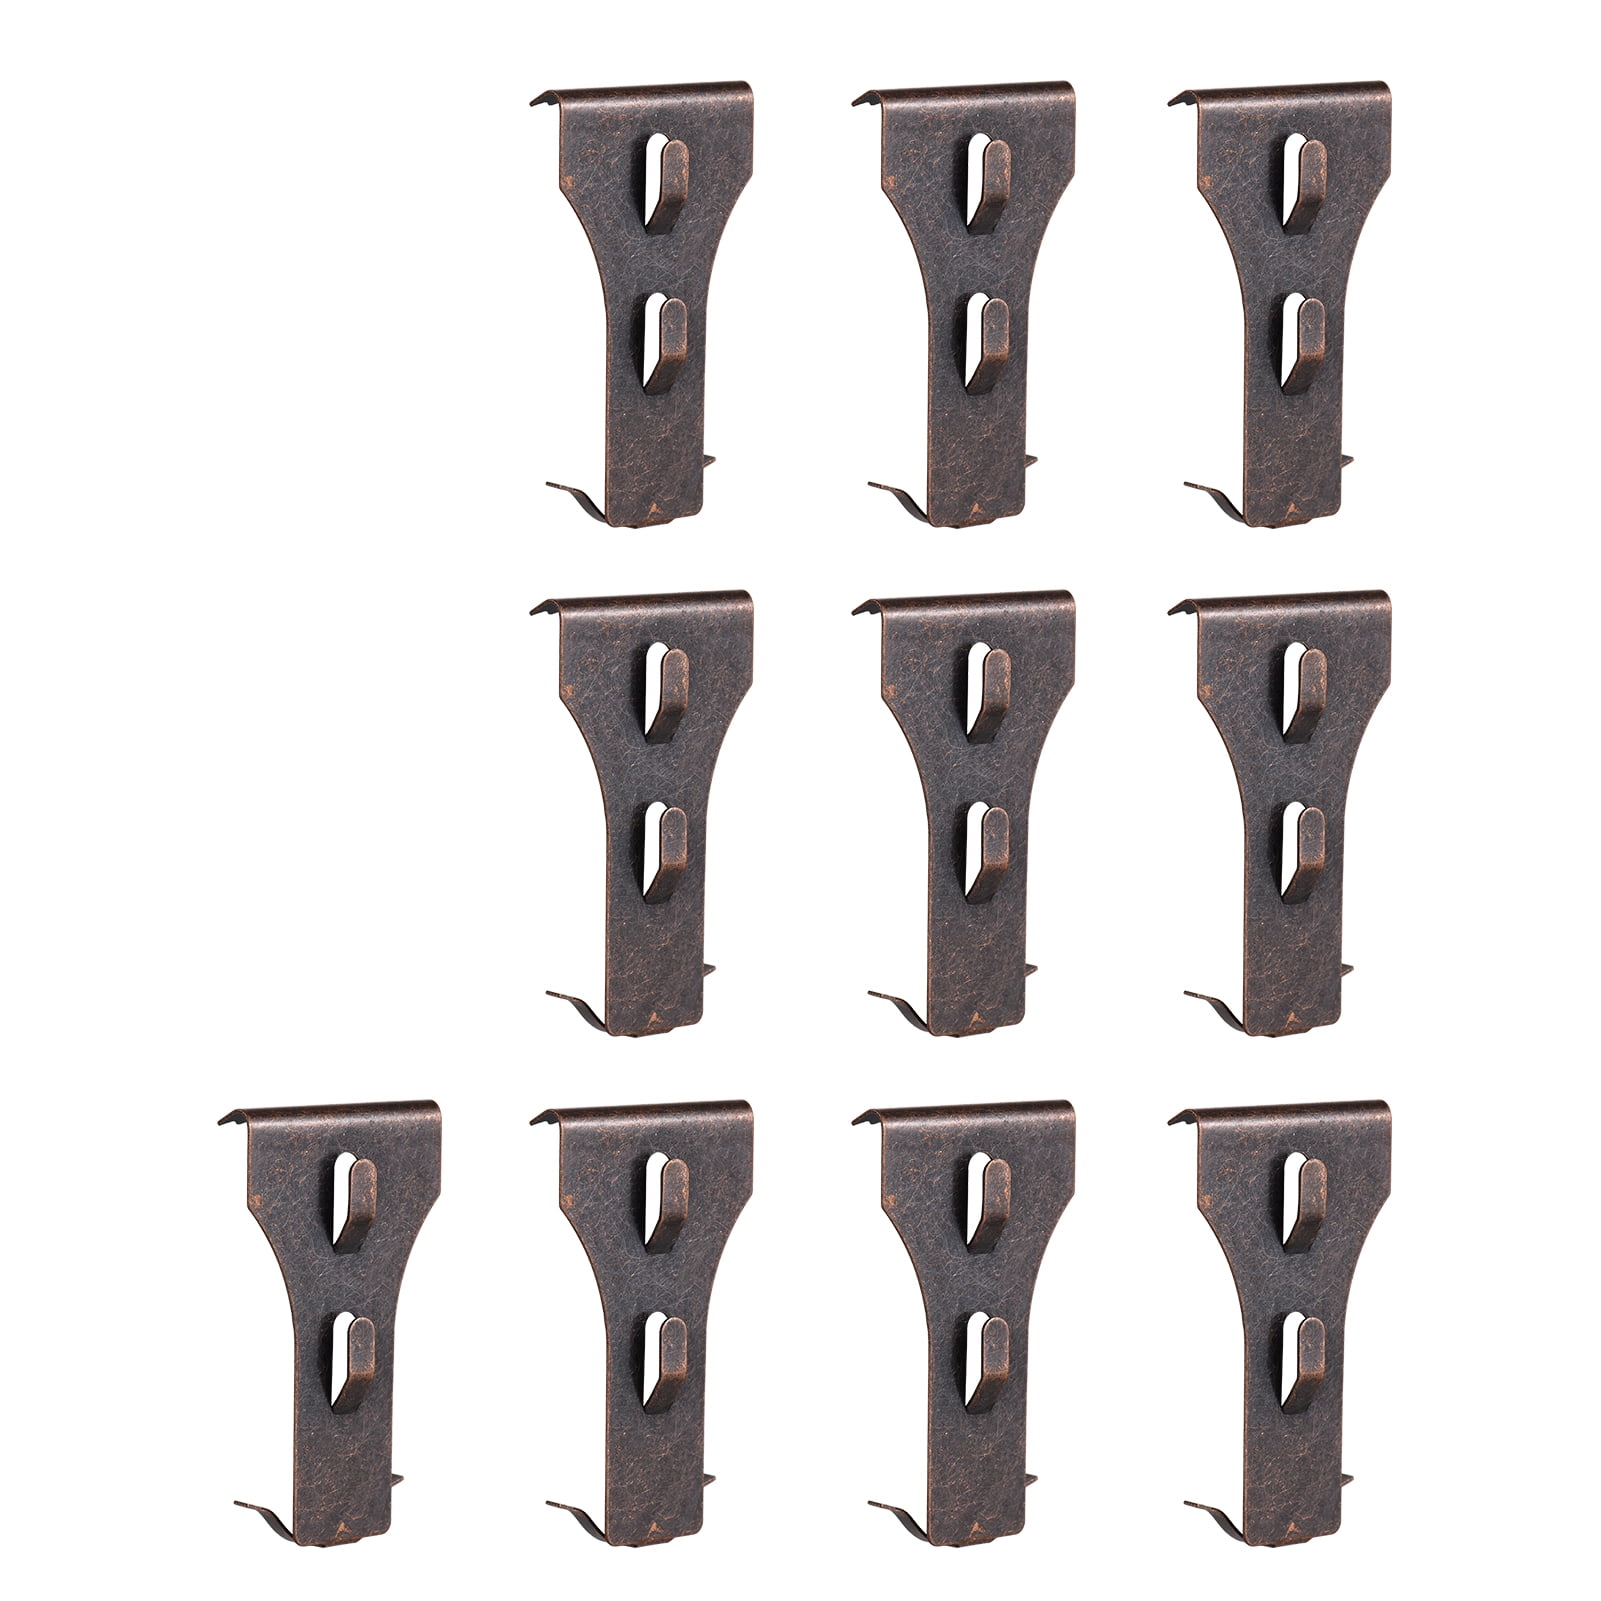 Brick Hook Clips-Bricks Hook Clip For Hanging Outdoors Wall Pictures, Brick  Hangers Fastener Hook Brick Clamps 18PCS Easy To Use - AliExpress